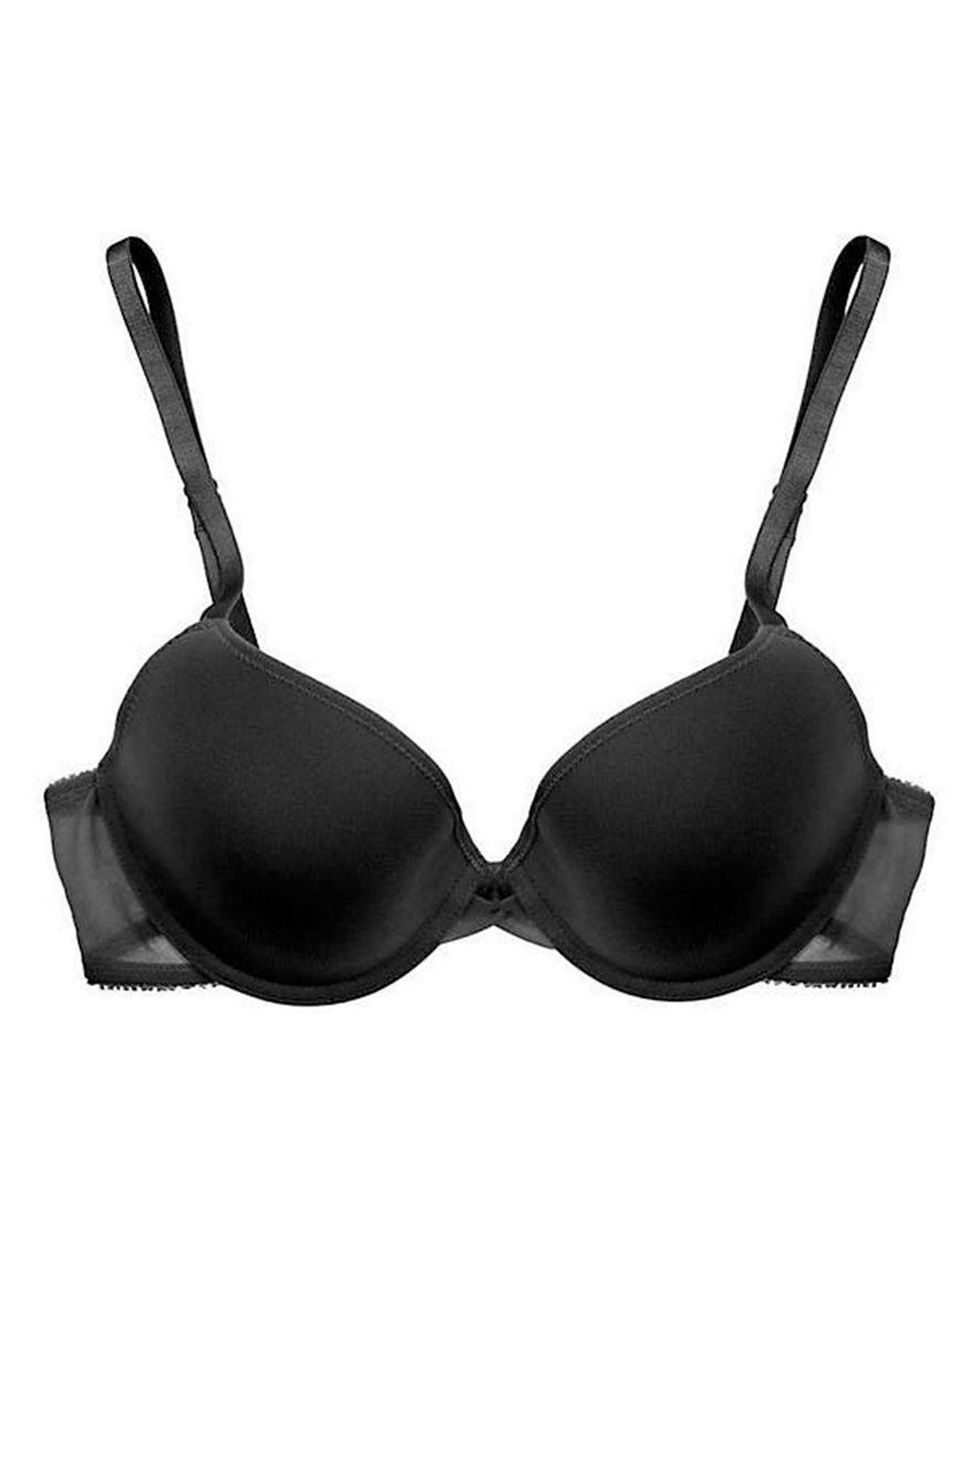 How can i make this bra a Push Up Bra that directly interacts with